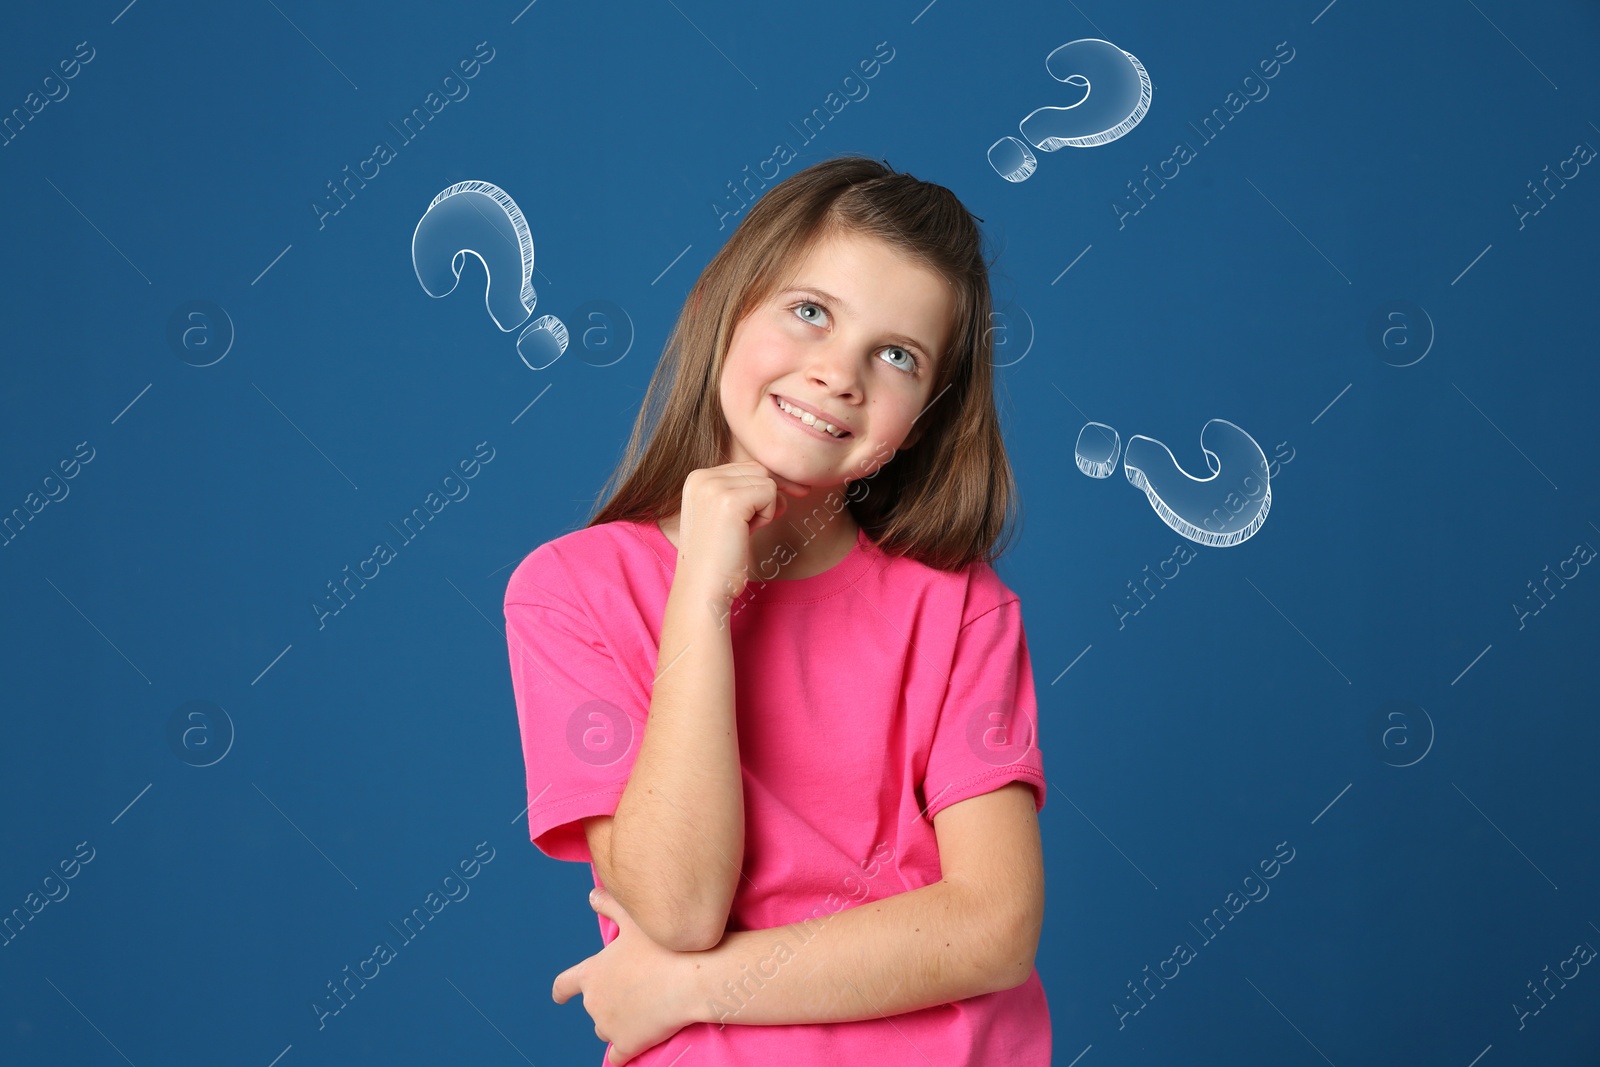 Image of Choice in profession or other areas of life, concept. Making decision, cute preteen girl surrounded by drawn question marks on blue background